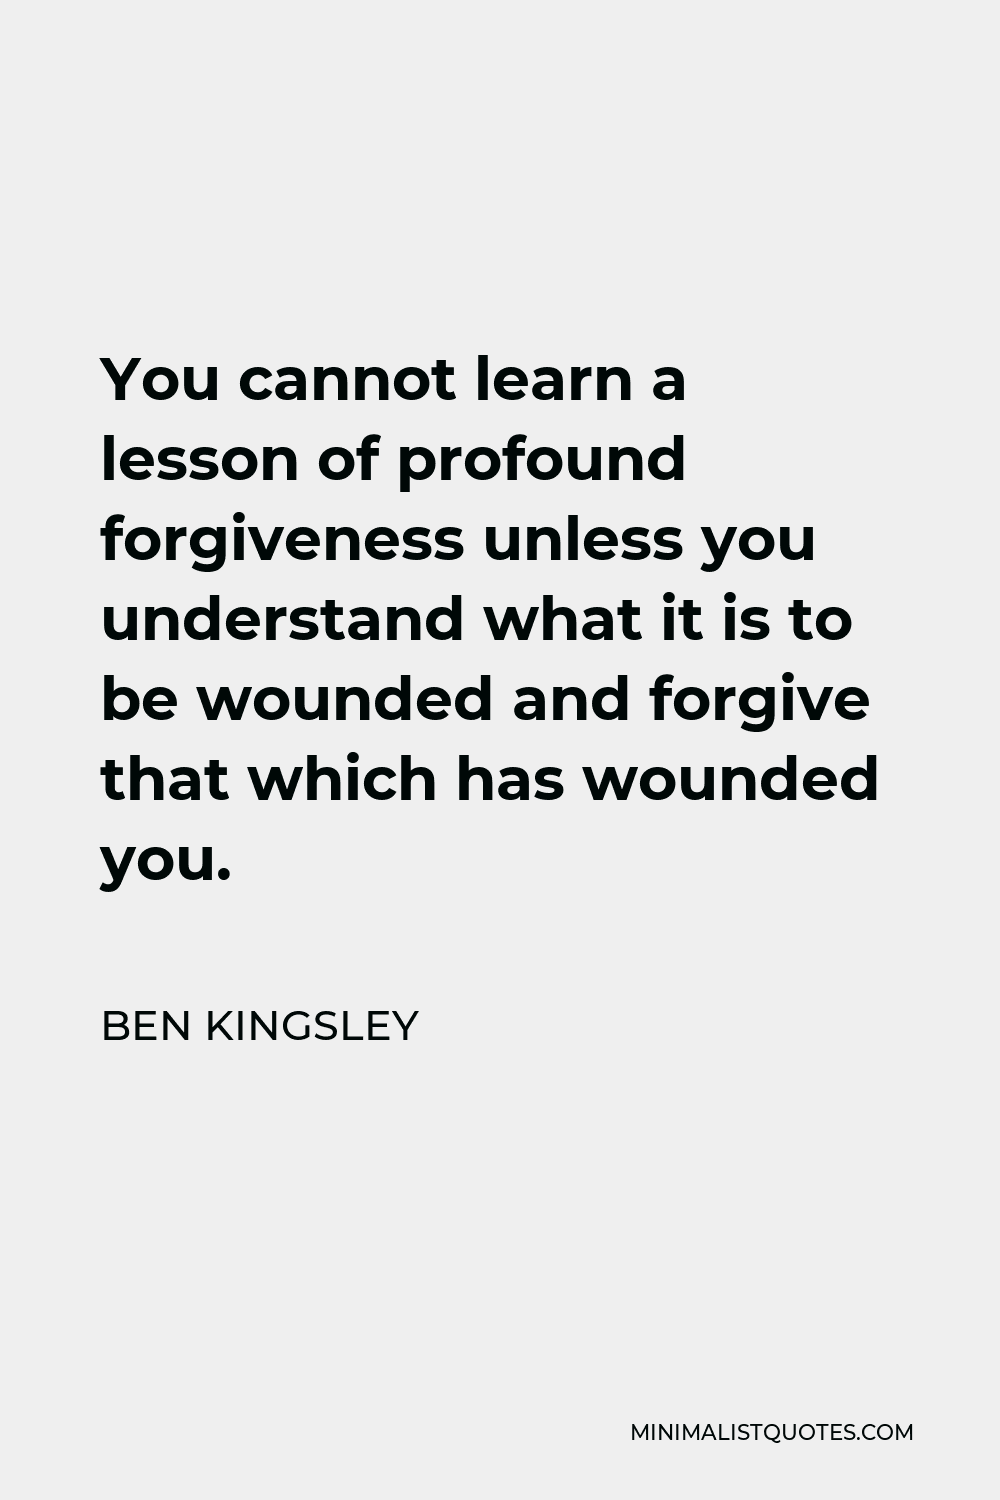 Ben Kingsley Quote - You cannot learn a lesson of profound forgiveness unless you understand what it is to be wounded and forgive that which has wounded you.